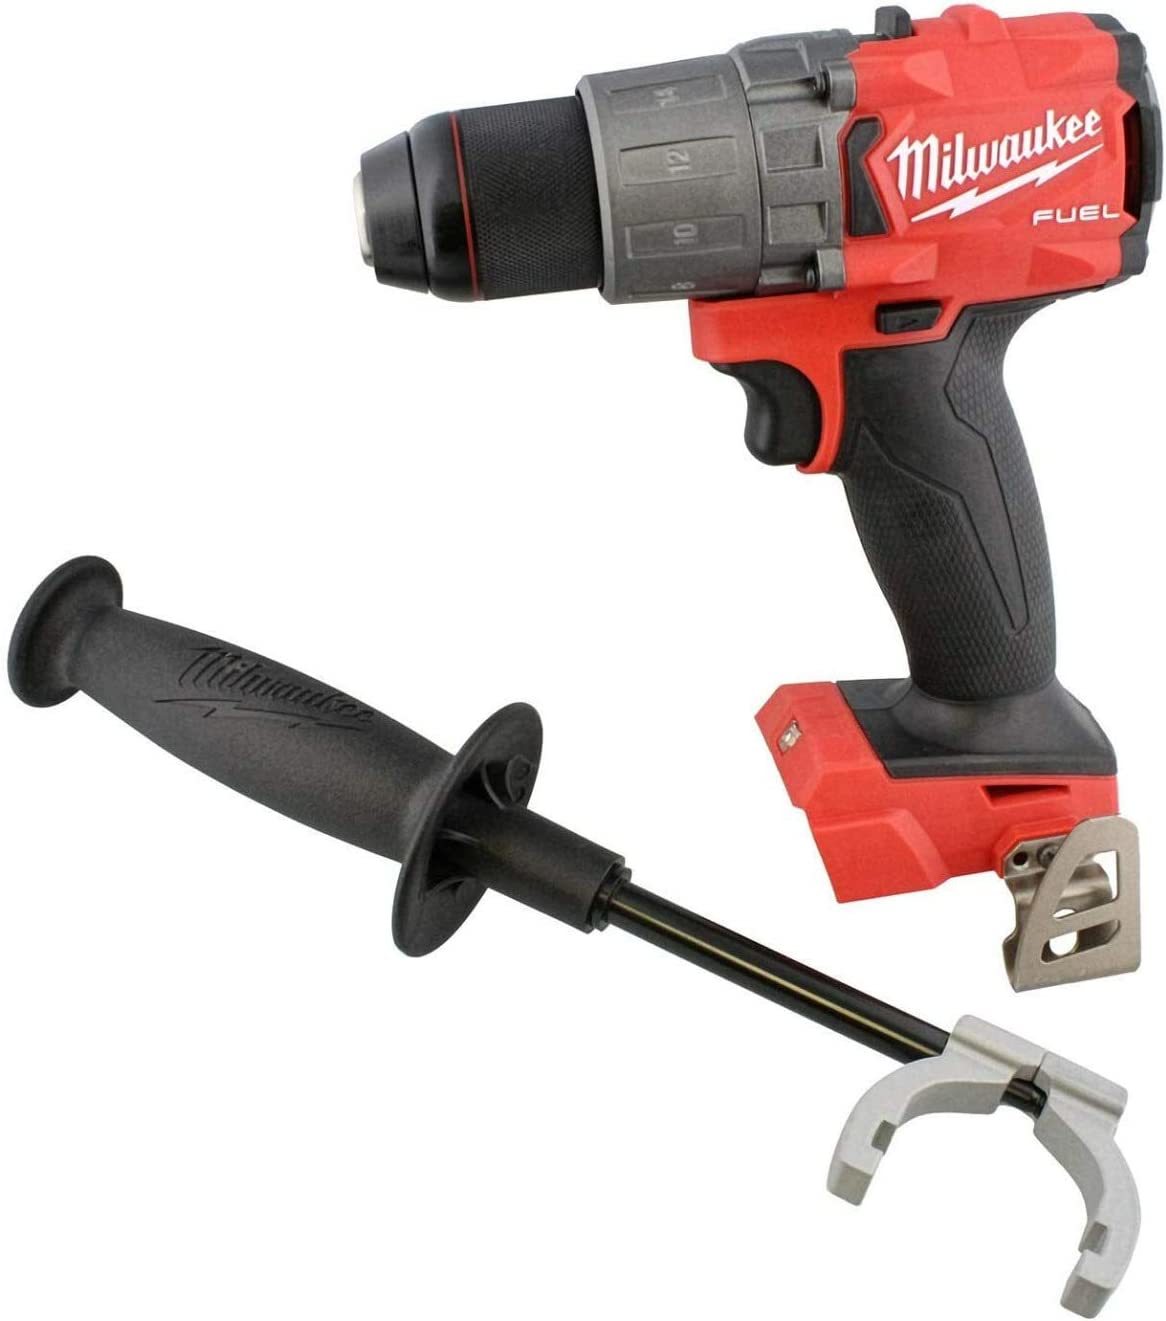 1/2" Drill/Driver (Bare Tool) With A Peak Torque Of 1,200 In-Lbs., 20 M18 Fuel. - $208.92